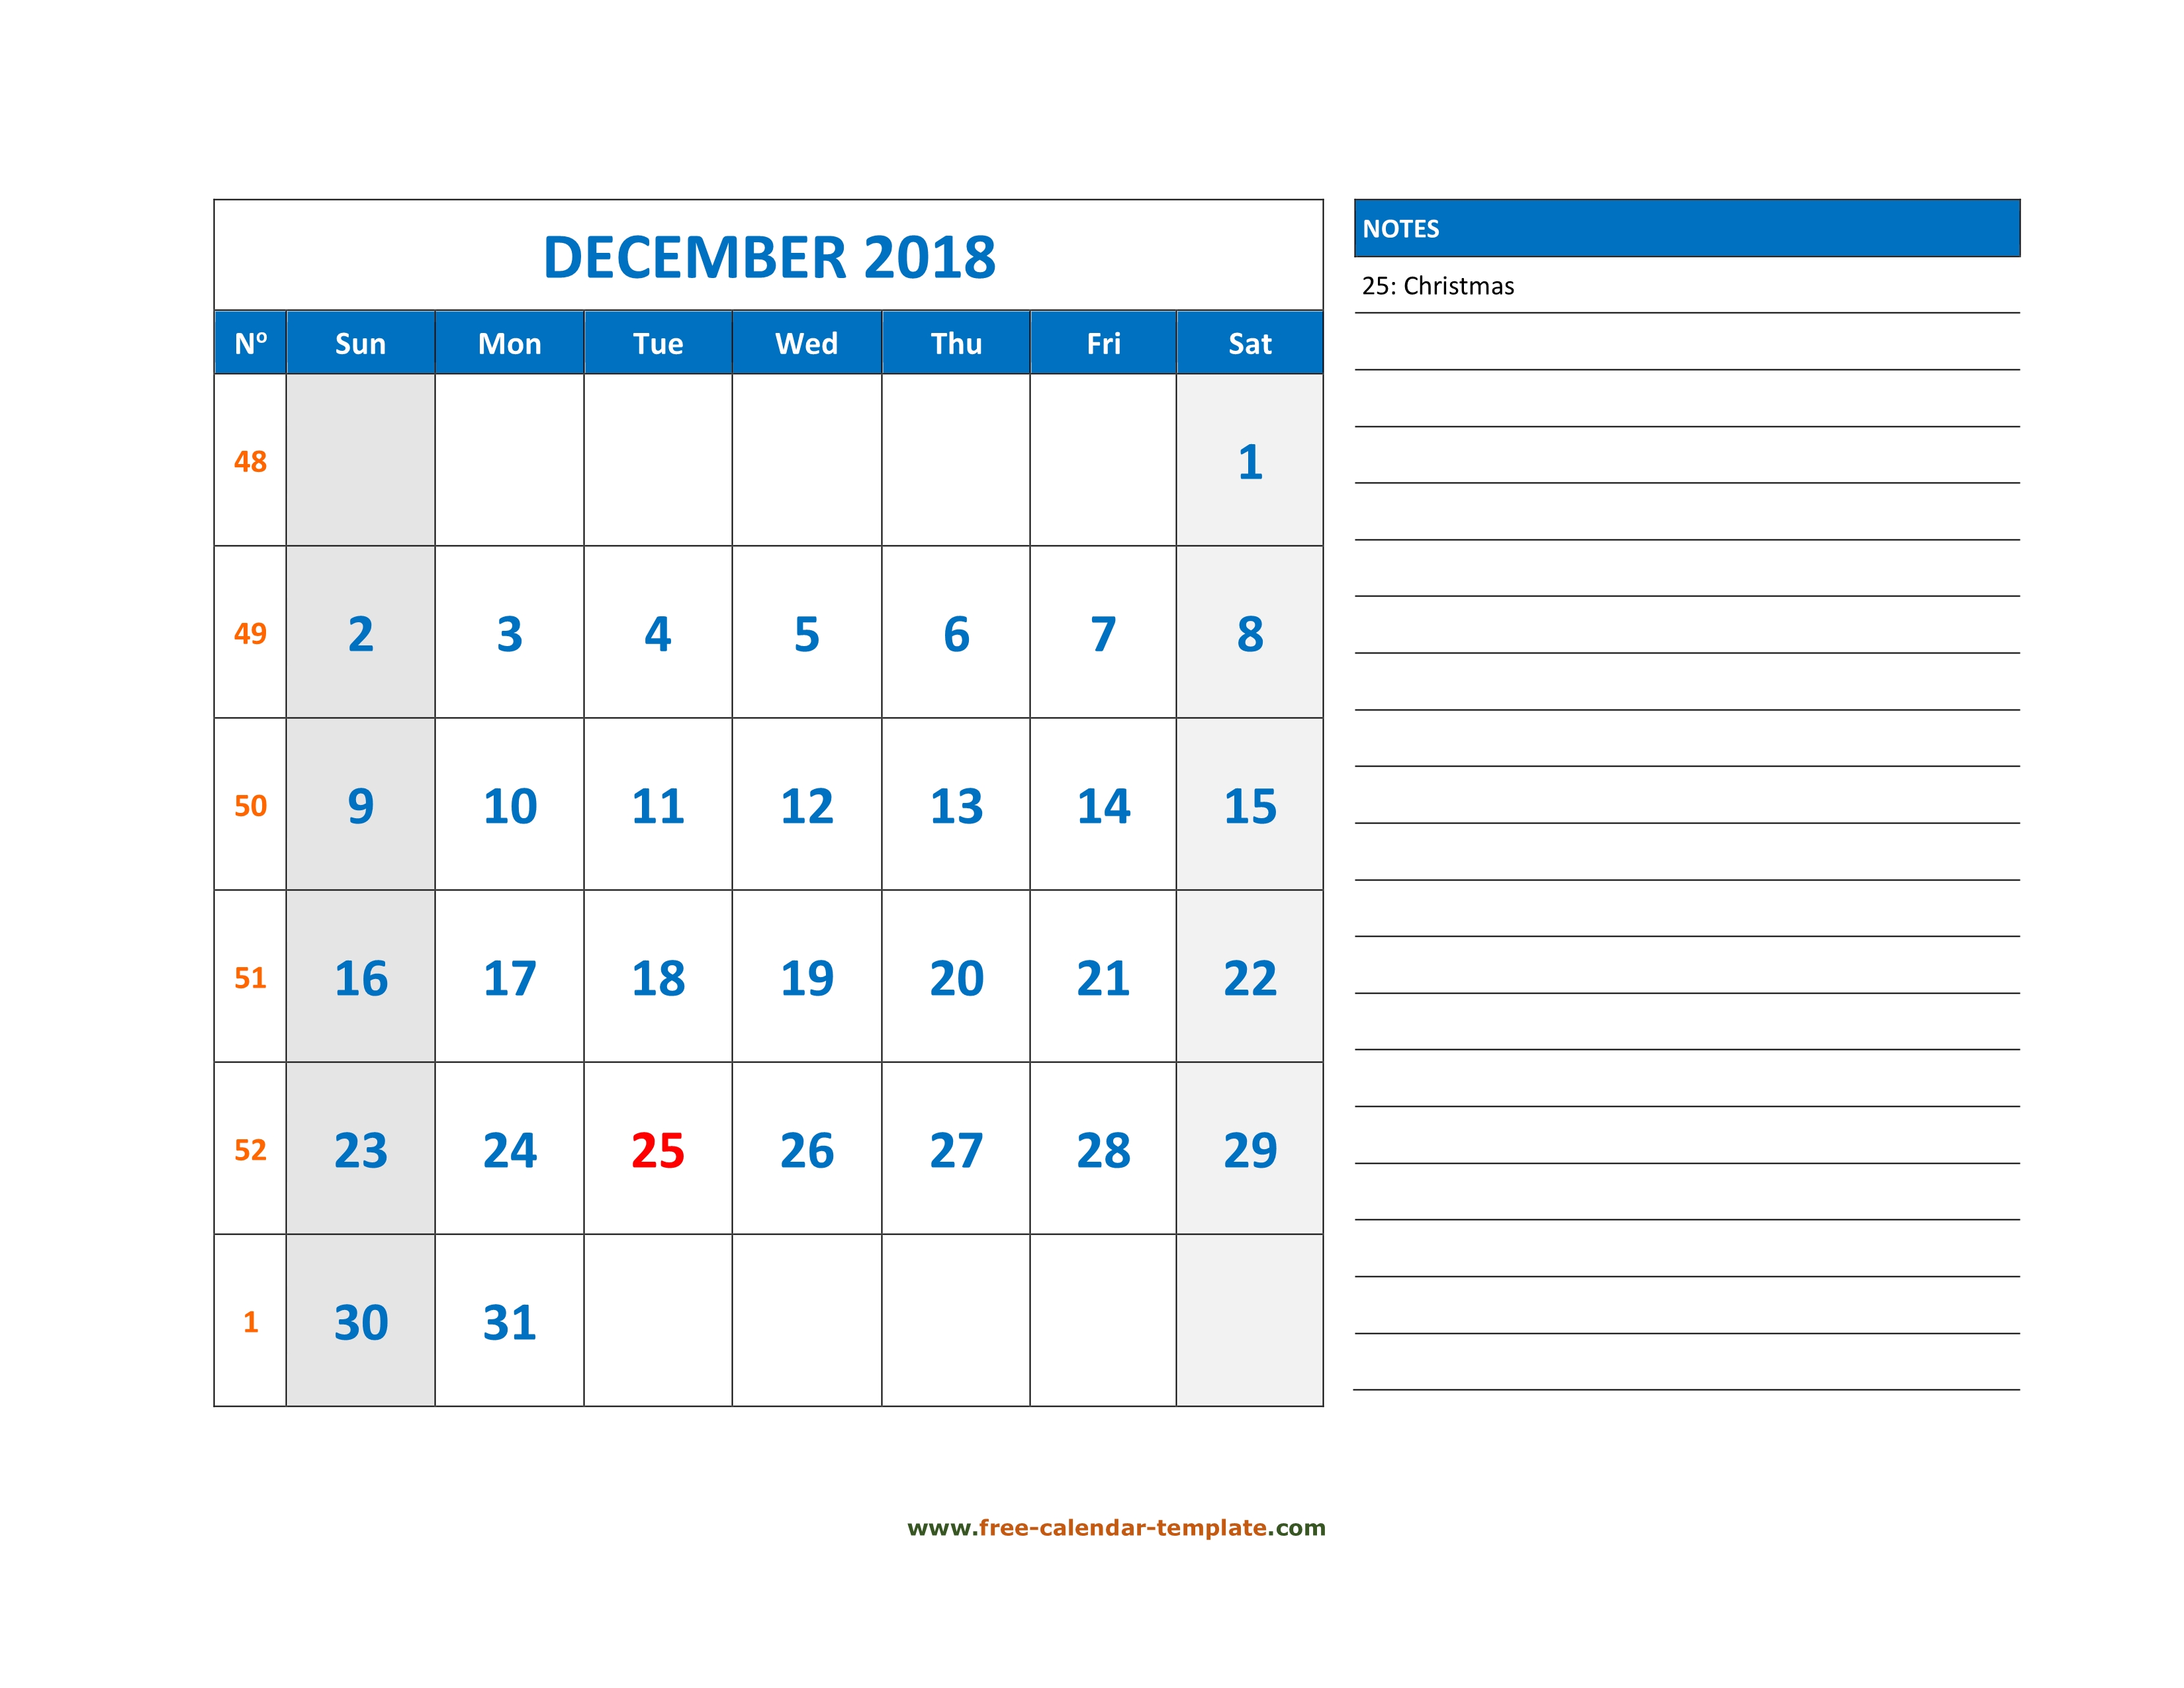 december-calendar-2018-grid-lines-for-holidays-and-notes-horizontal